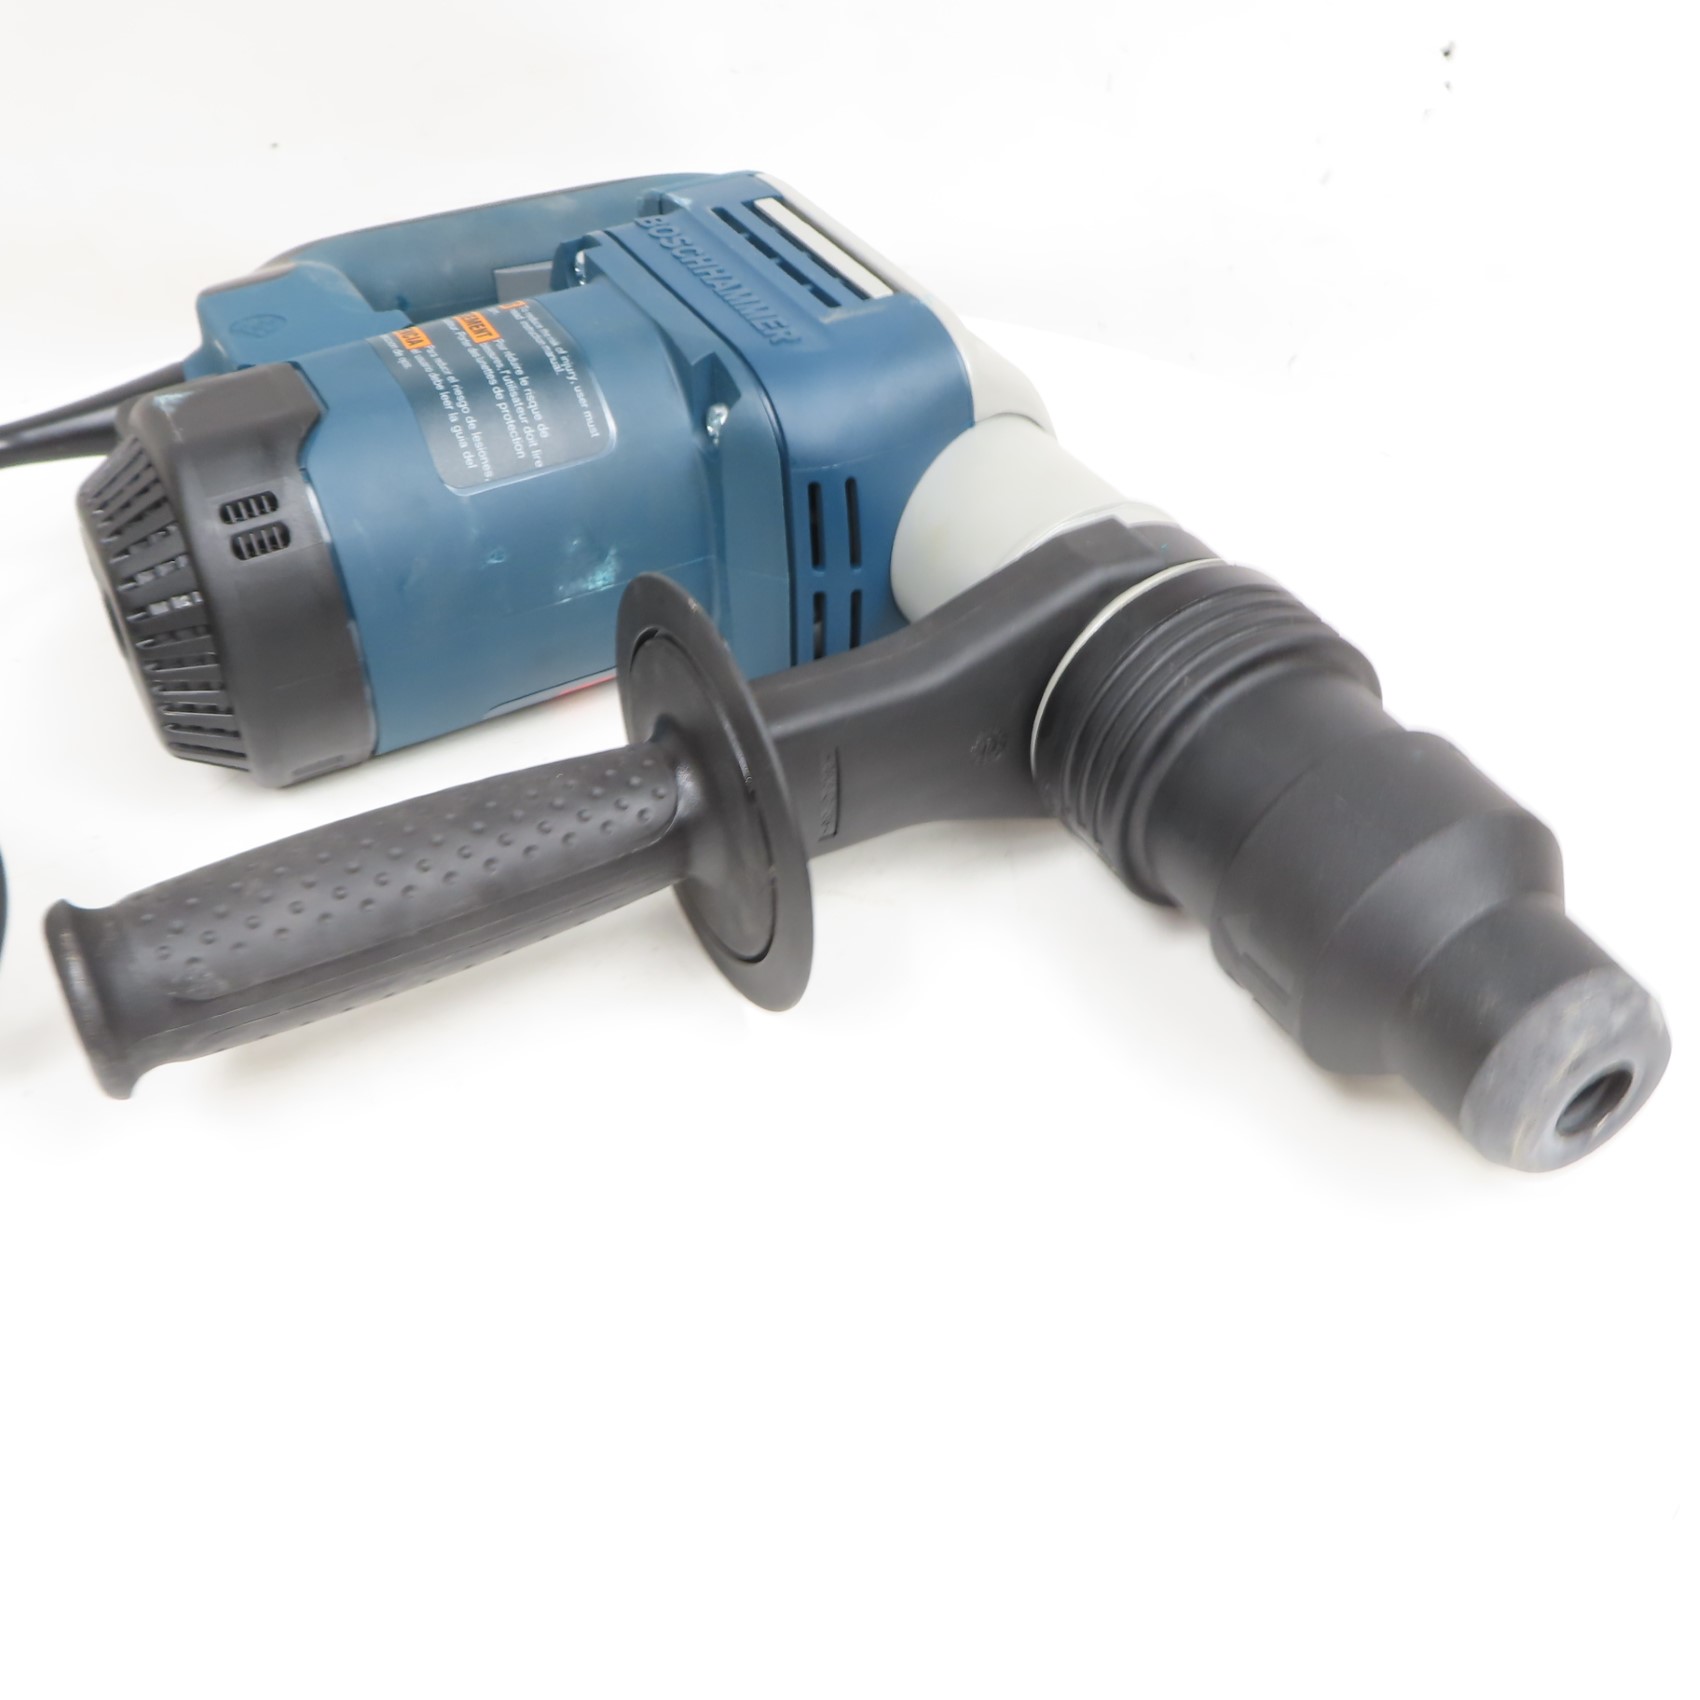 Dremel 4300 1.8A Variable Speed Corded Rotary Tool